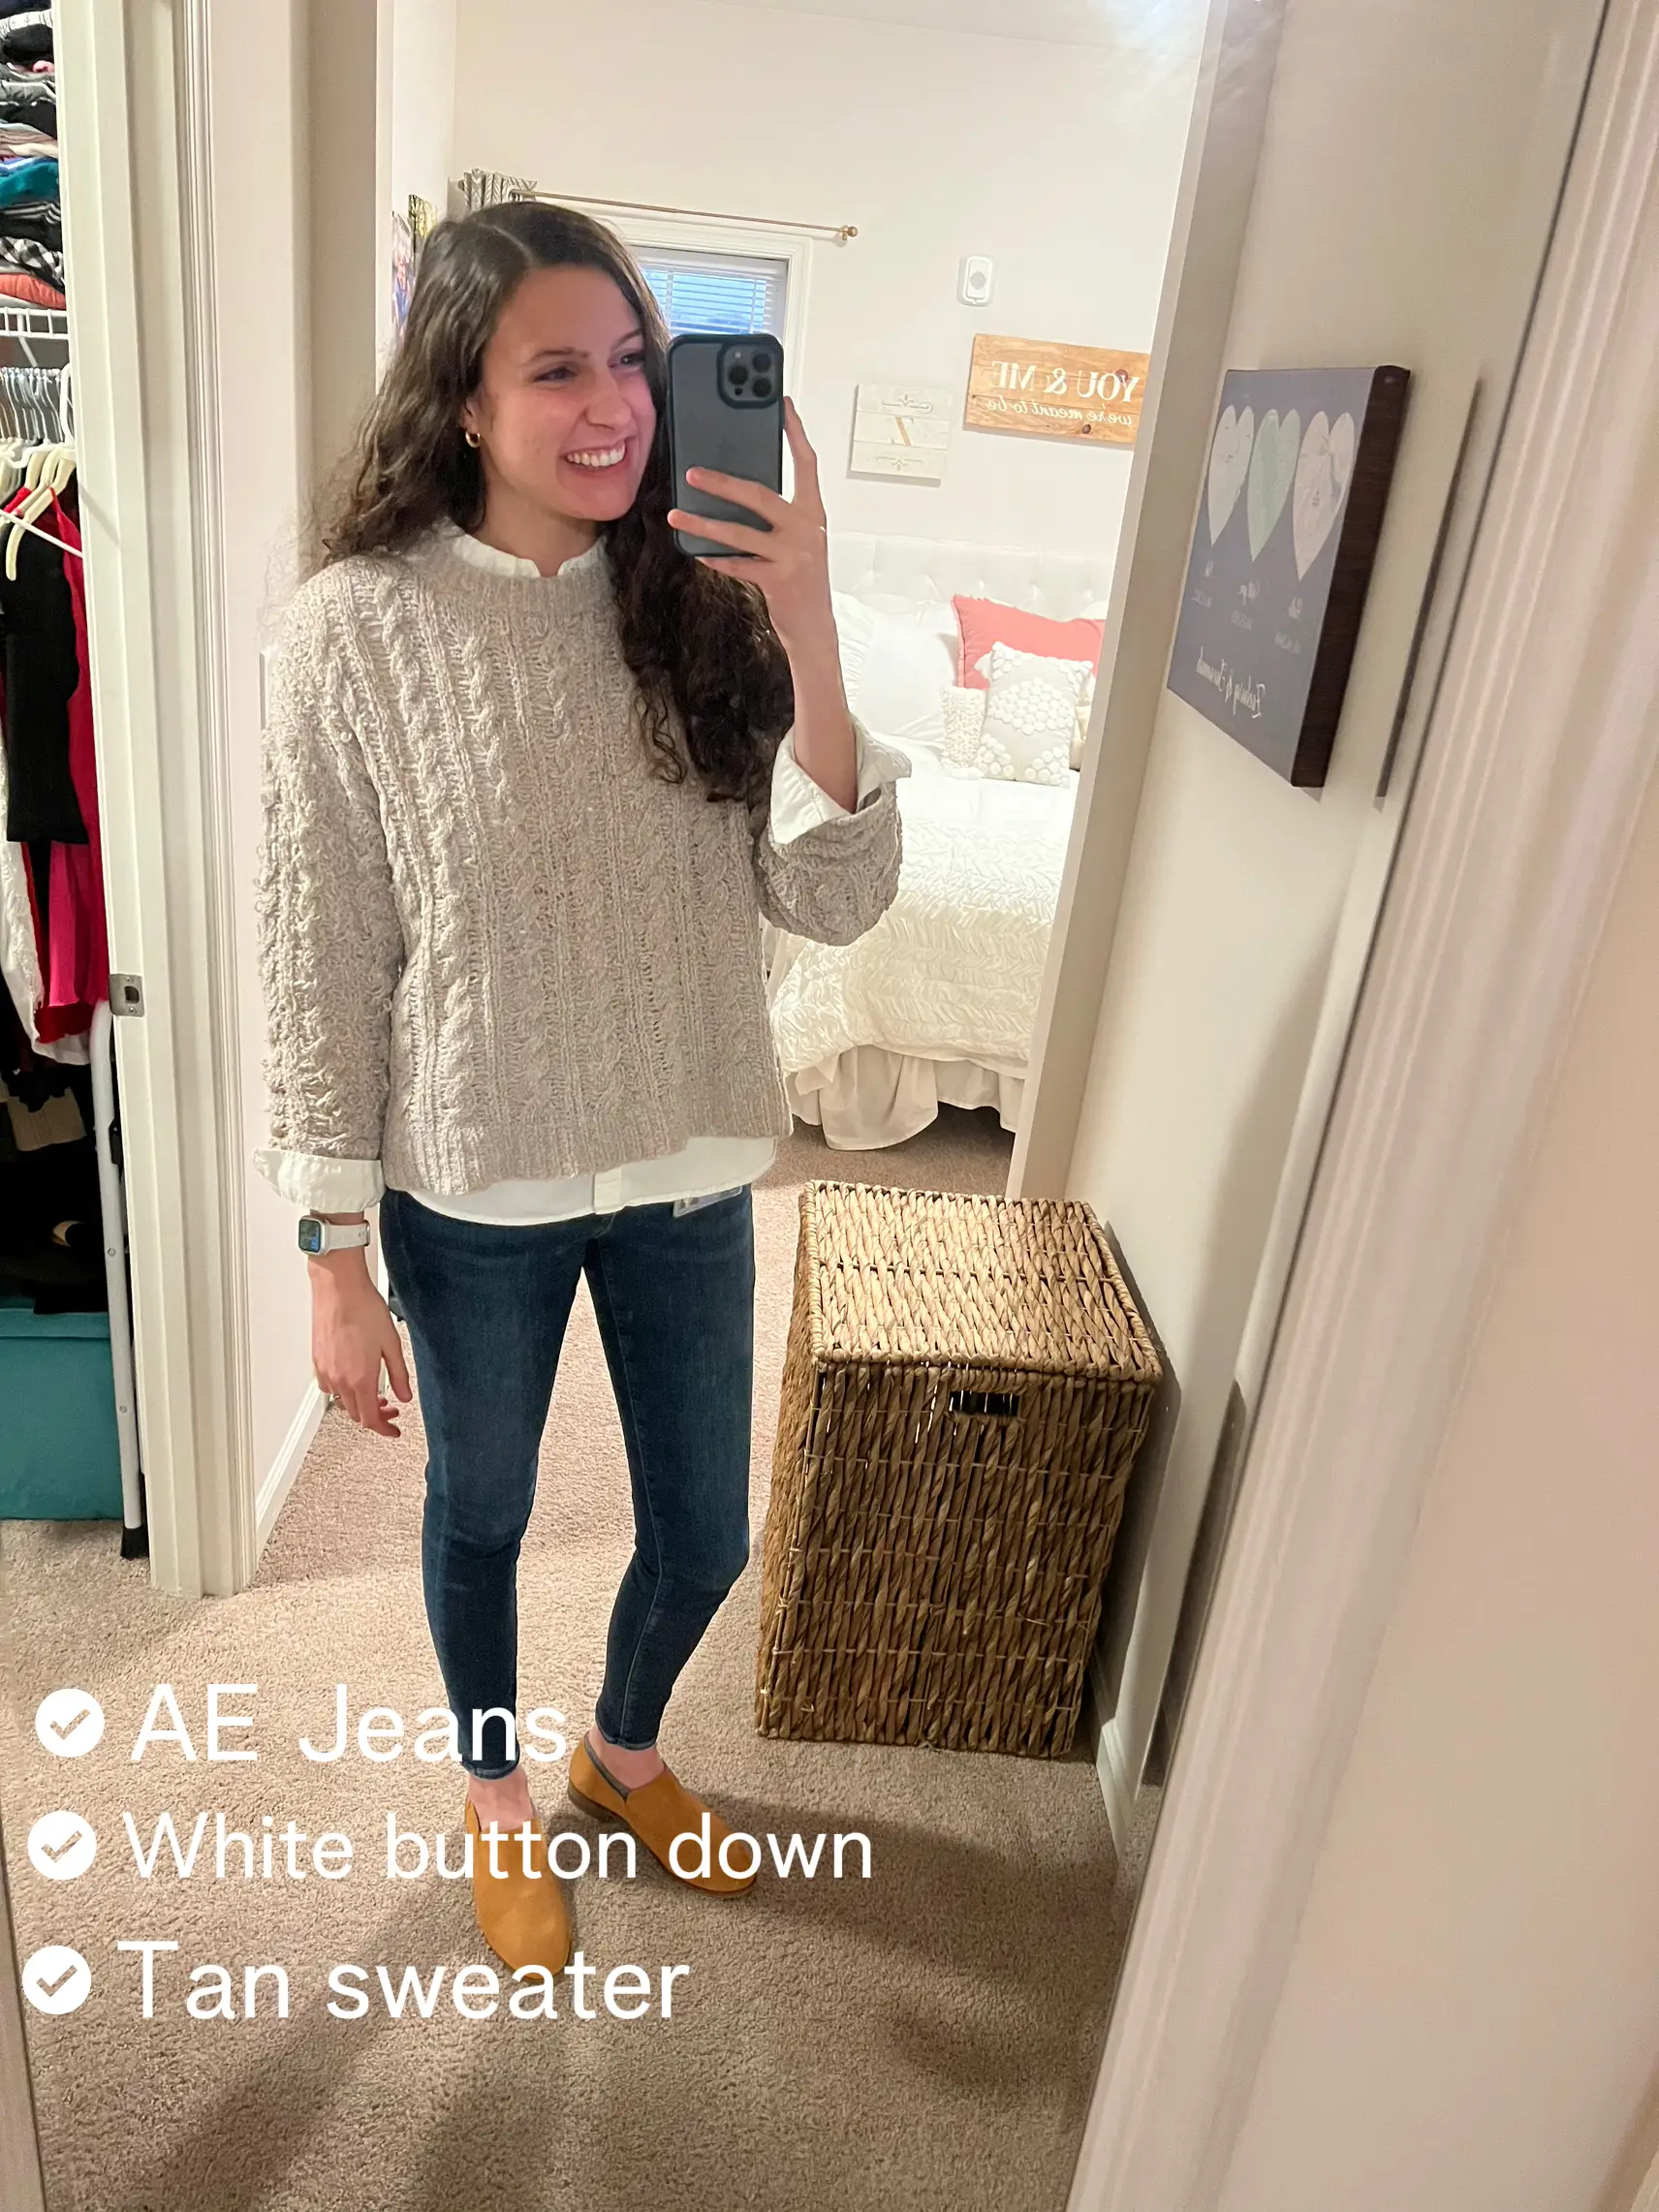 WINTER BUSINESS CASUAL OUTFIT  Gallery posted by Tay Cardines